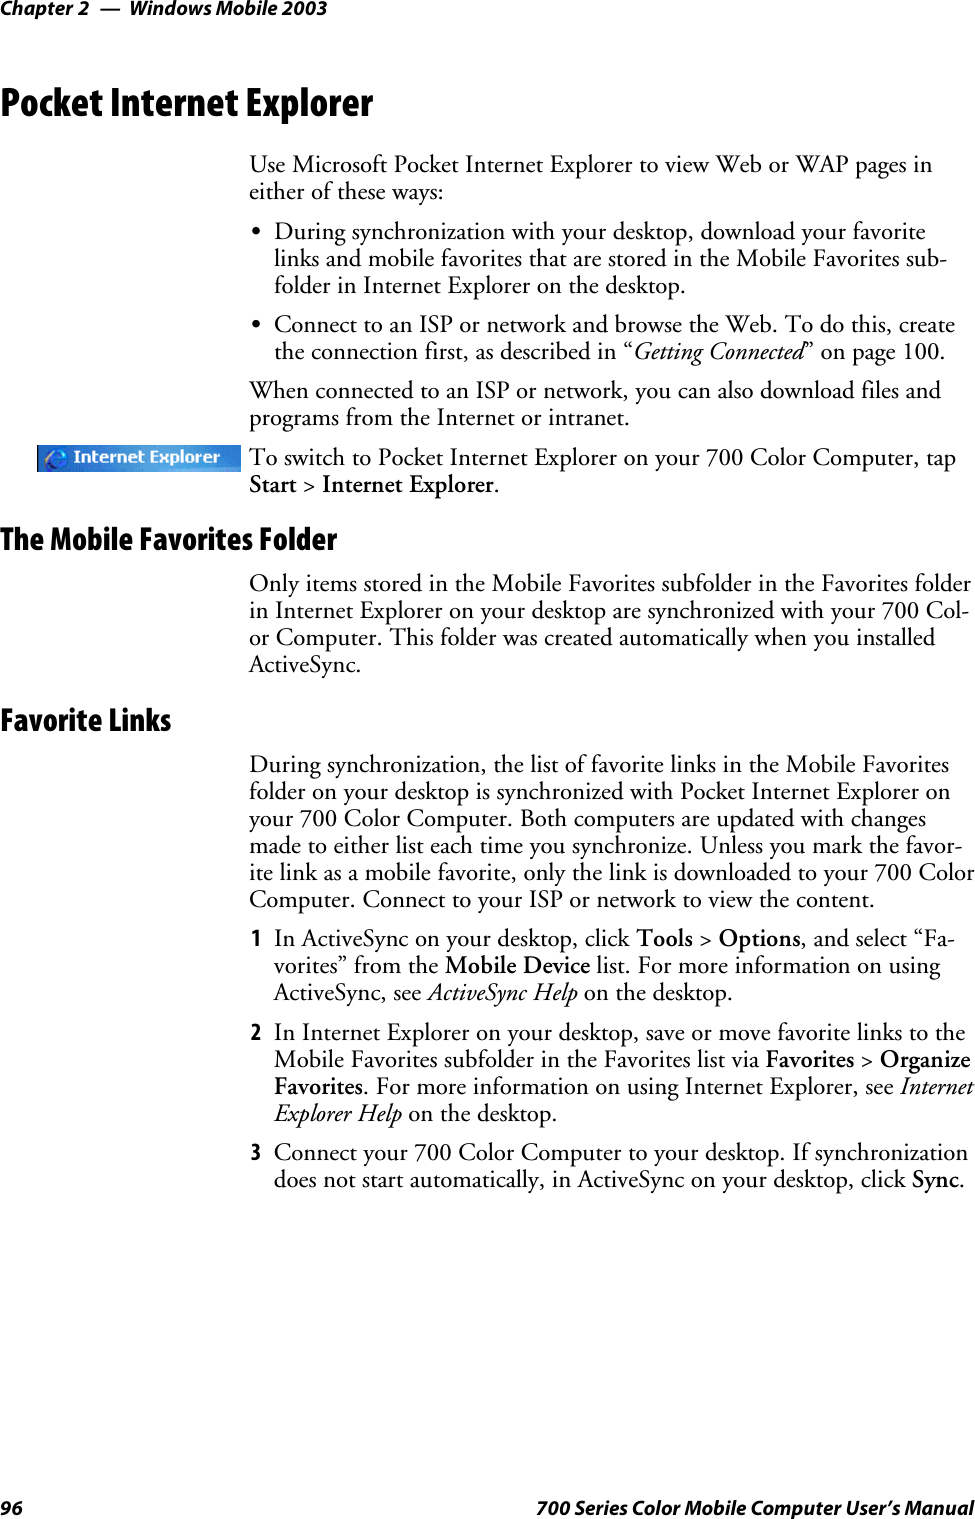 Windows Mobile 2003Chapter —296 700 Series Color Mobile Computer User’s ManualPocket Internet ExplorerUse Microsoft Pocket Internet Explorer to view Web or WAP pages ineither of these ways:SDuring synchronization with your desktop, download your favoritelinks and mobile favorites that are stored in the Mobile Favorites sub-folder in Internet Explorer on the desktop.SConnect to an ISP or network and browse the Web. To do this, createthe connection first, as described in “Getting Connected” on page 100.When connected to an ISP or network, you can also download files andprograms from the Internet or intranet.To switch to Pocket Internet Explorer on your 700 Color Computer, tapStart &gt;Internet Explorer.The Mobile Favorites FolderOnly items stored in the Mobile Favorites subfolder in the Favorites folderin Internet Explorer on your desktop are synchronized with your 700 Col-or Computer. This folder was created automatically when you installedActiveSync.Favorite LinksDuring synchronization, the list of favorite links in the Mobile Favoritesfolder on your desktop is synchronized with Pocket Internet Explorer onyour 700 Color Computer. Both computers are updated with changesmade to either list each time you synchronize. Unless you mark the favor-ite link as a mobile favorite, only the link is downloaded to your 700 ColorComputer. Connect to your ISP or network to view the content.1In ActiveSync on your desktop, click Tools &gt;Options, and select “Fa-vorites” from the Mobile Device list. For more information on usingActiveSync, see ActiveSync Help on the desktop.2In Internet Explorer on your desktop, save or move favorite links to theMobile Favorites subfolder in the Favorites list via Favorites &gt;OrganizeFavorites. For more information on using Internet Explorer, see InternetExplorer Help on the desktop.3Connect your 700 Color Computer to your desktop. If synchronizationdoes not start automatically, in ActiveSync on your desktop, click Sync.